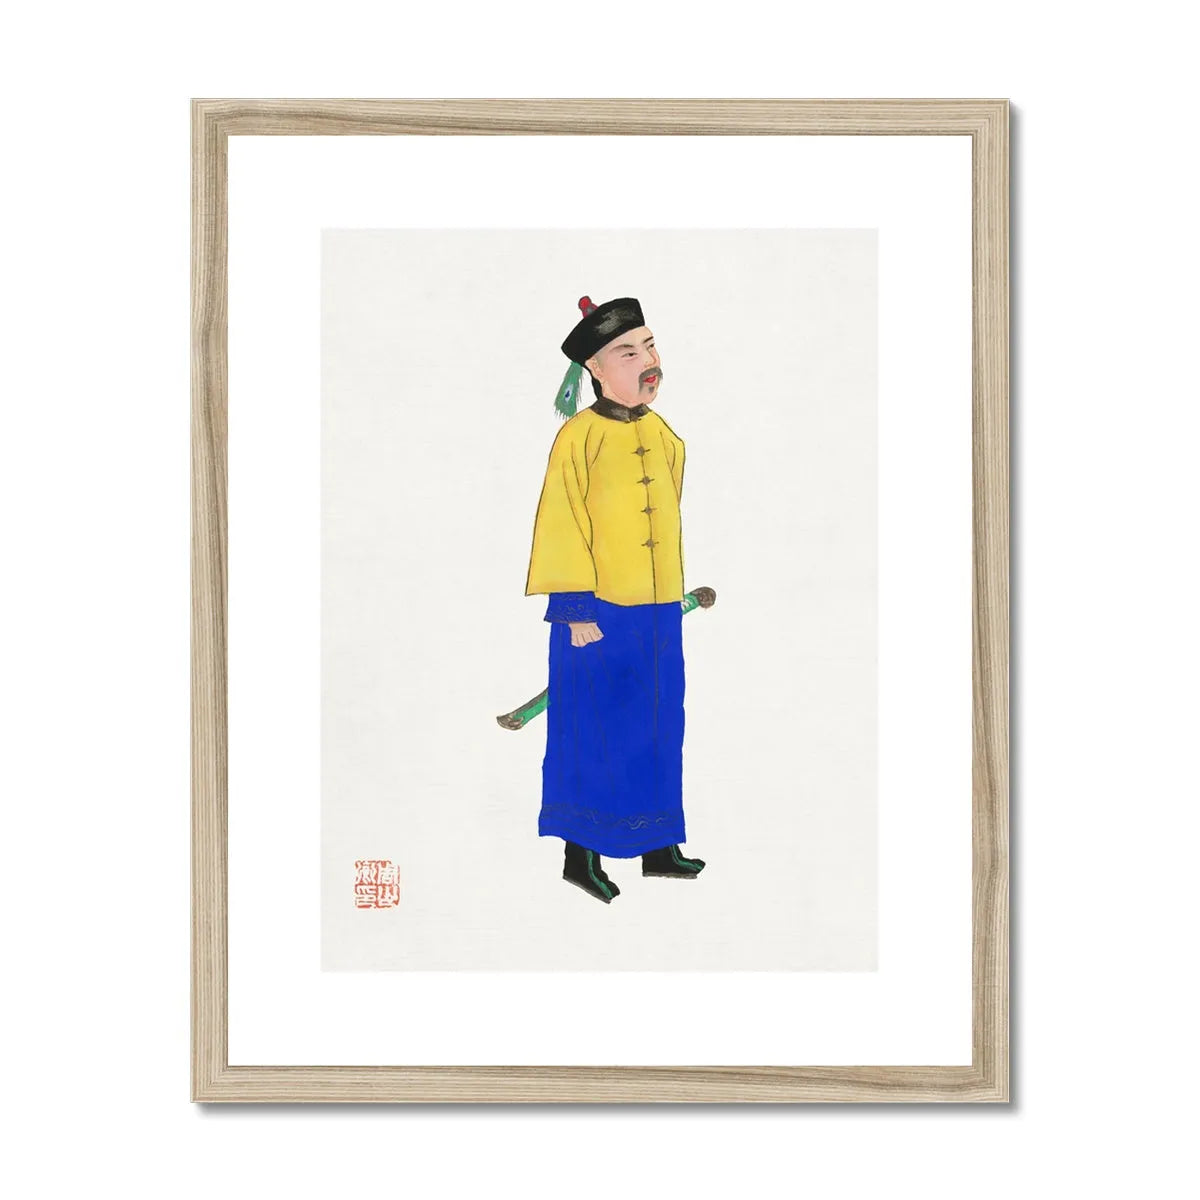 Chinese Military Man Framed & Mounted Print - 16’x20’ / Natural Frame - Posters Prints & Visual Artwork - Aesthetic Art